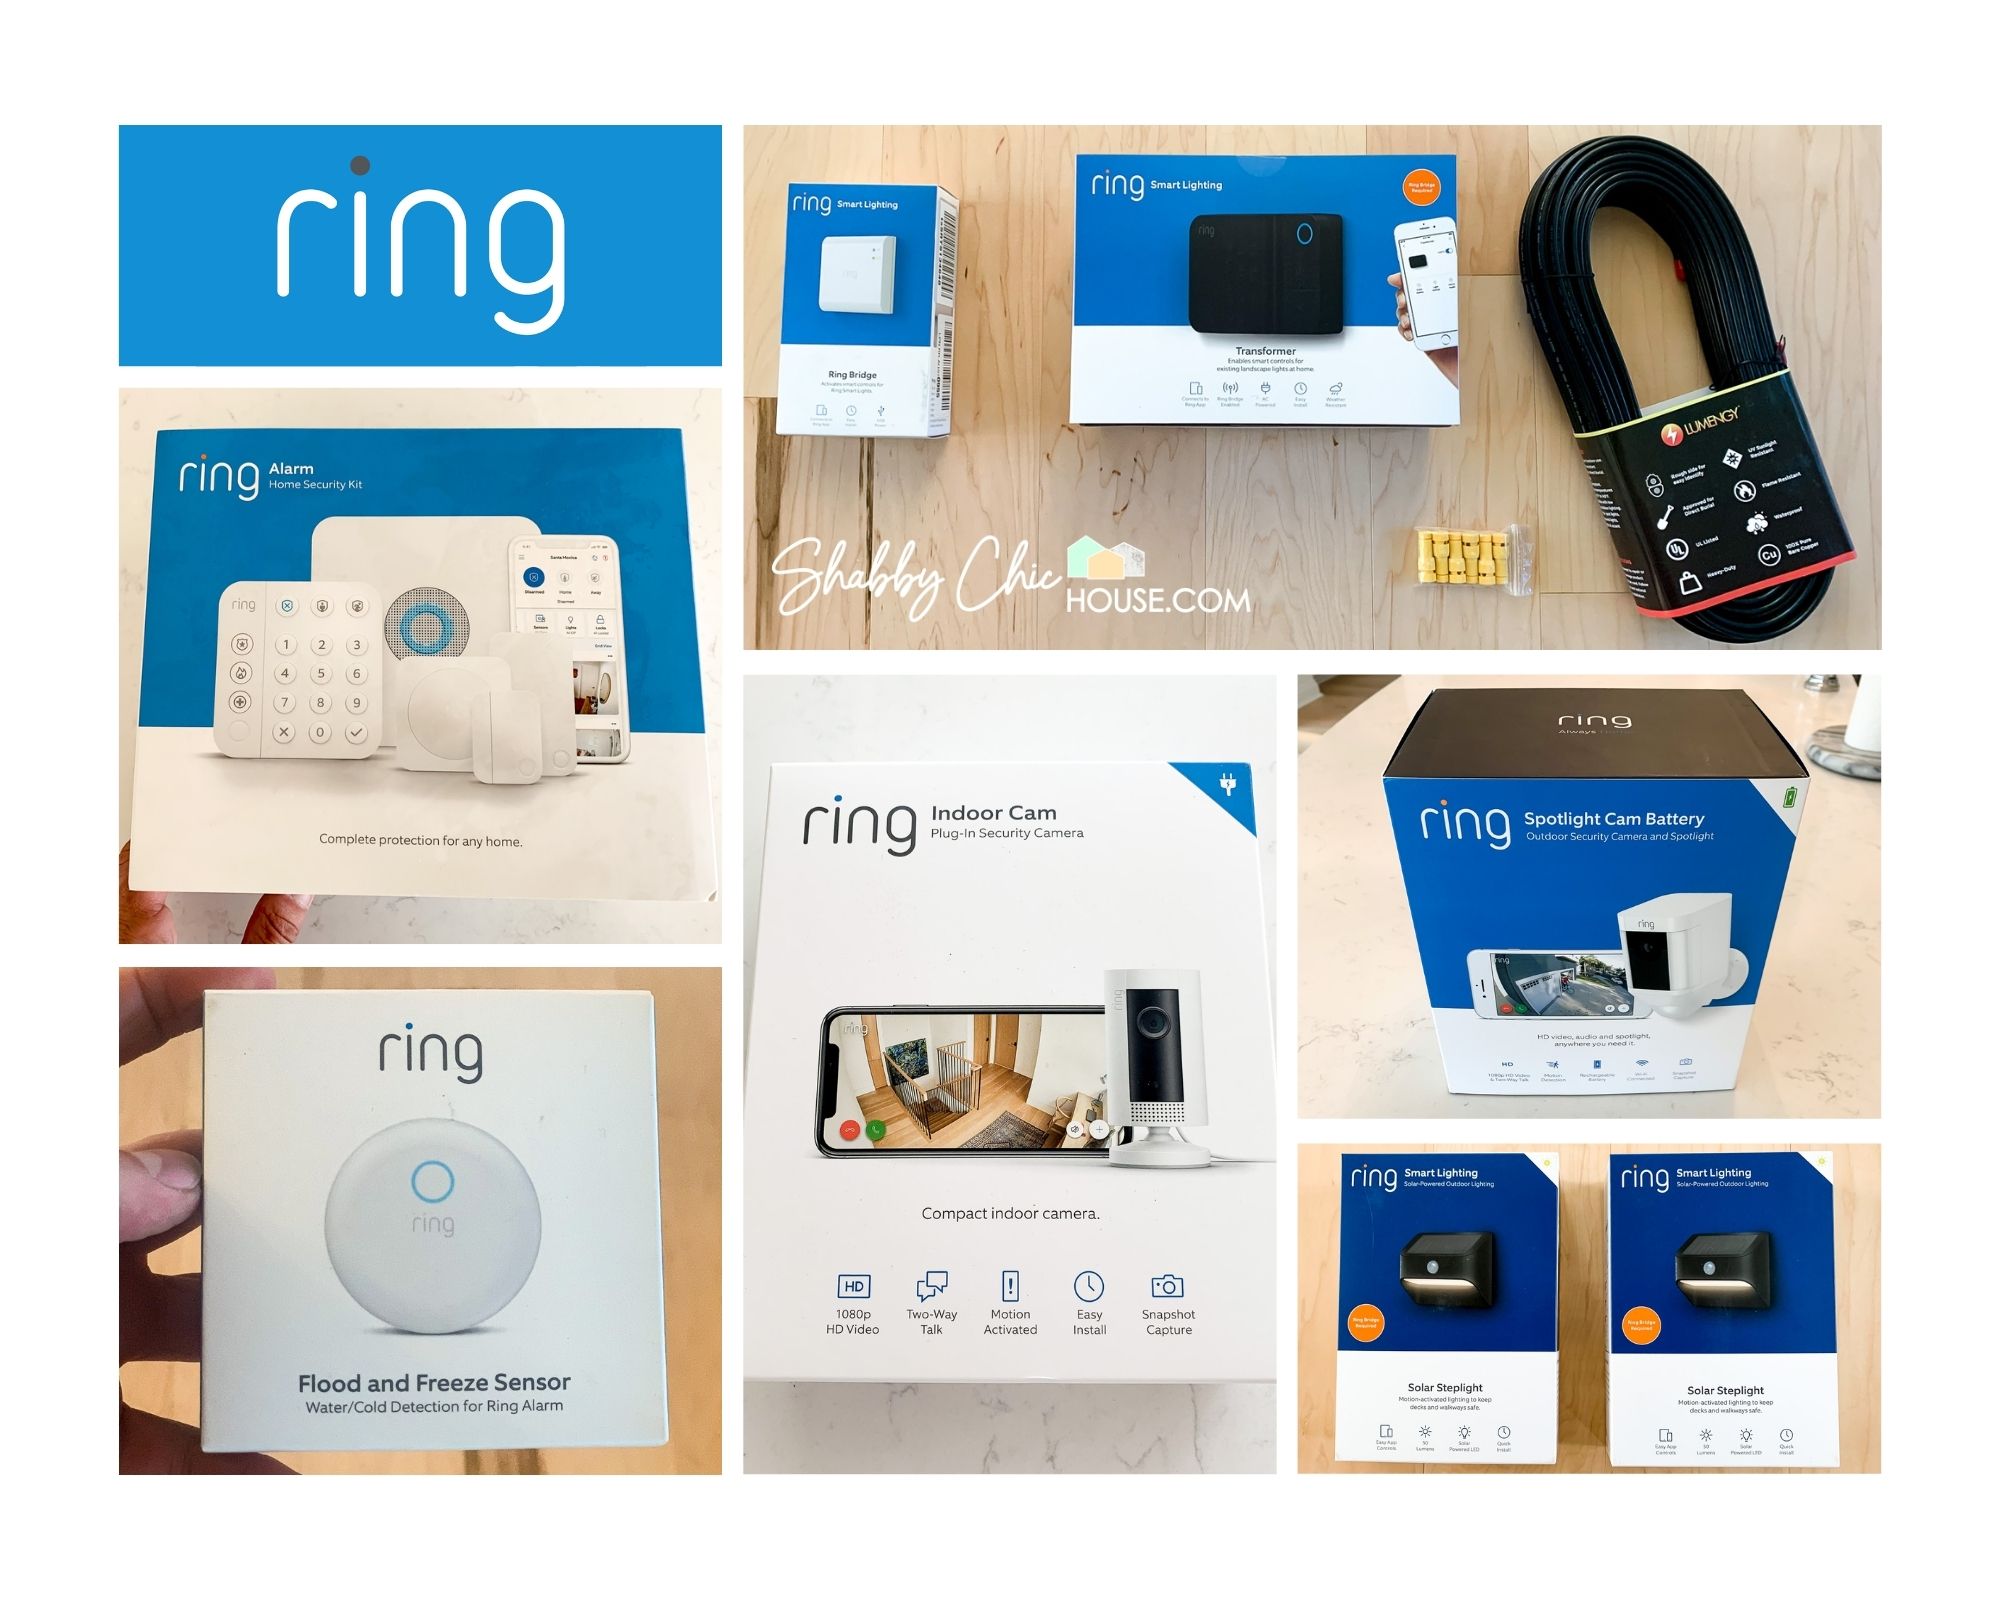 What's Ring Protect and do you really need it? 